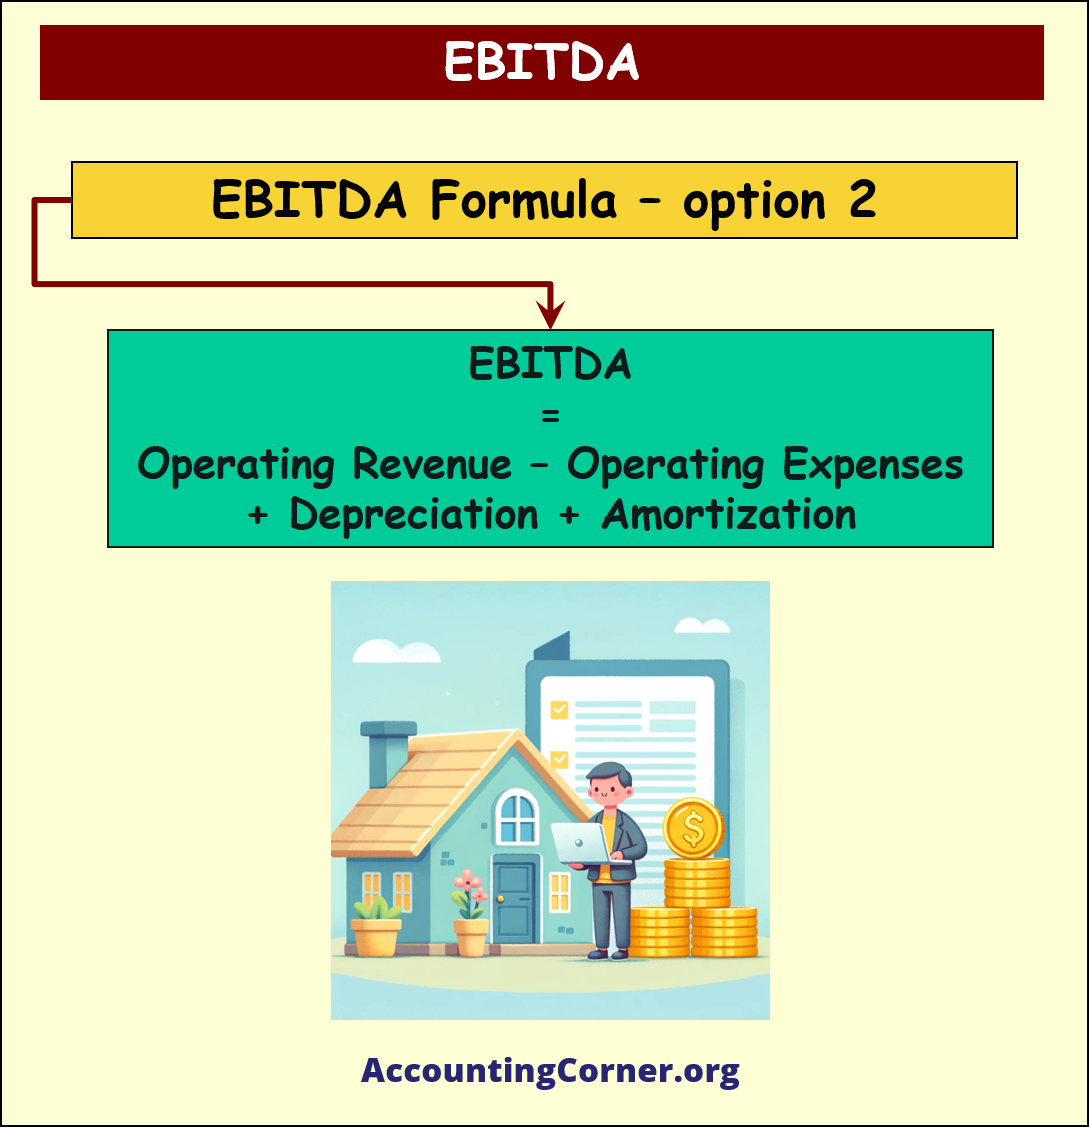 what does EBITDA stand for